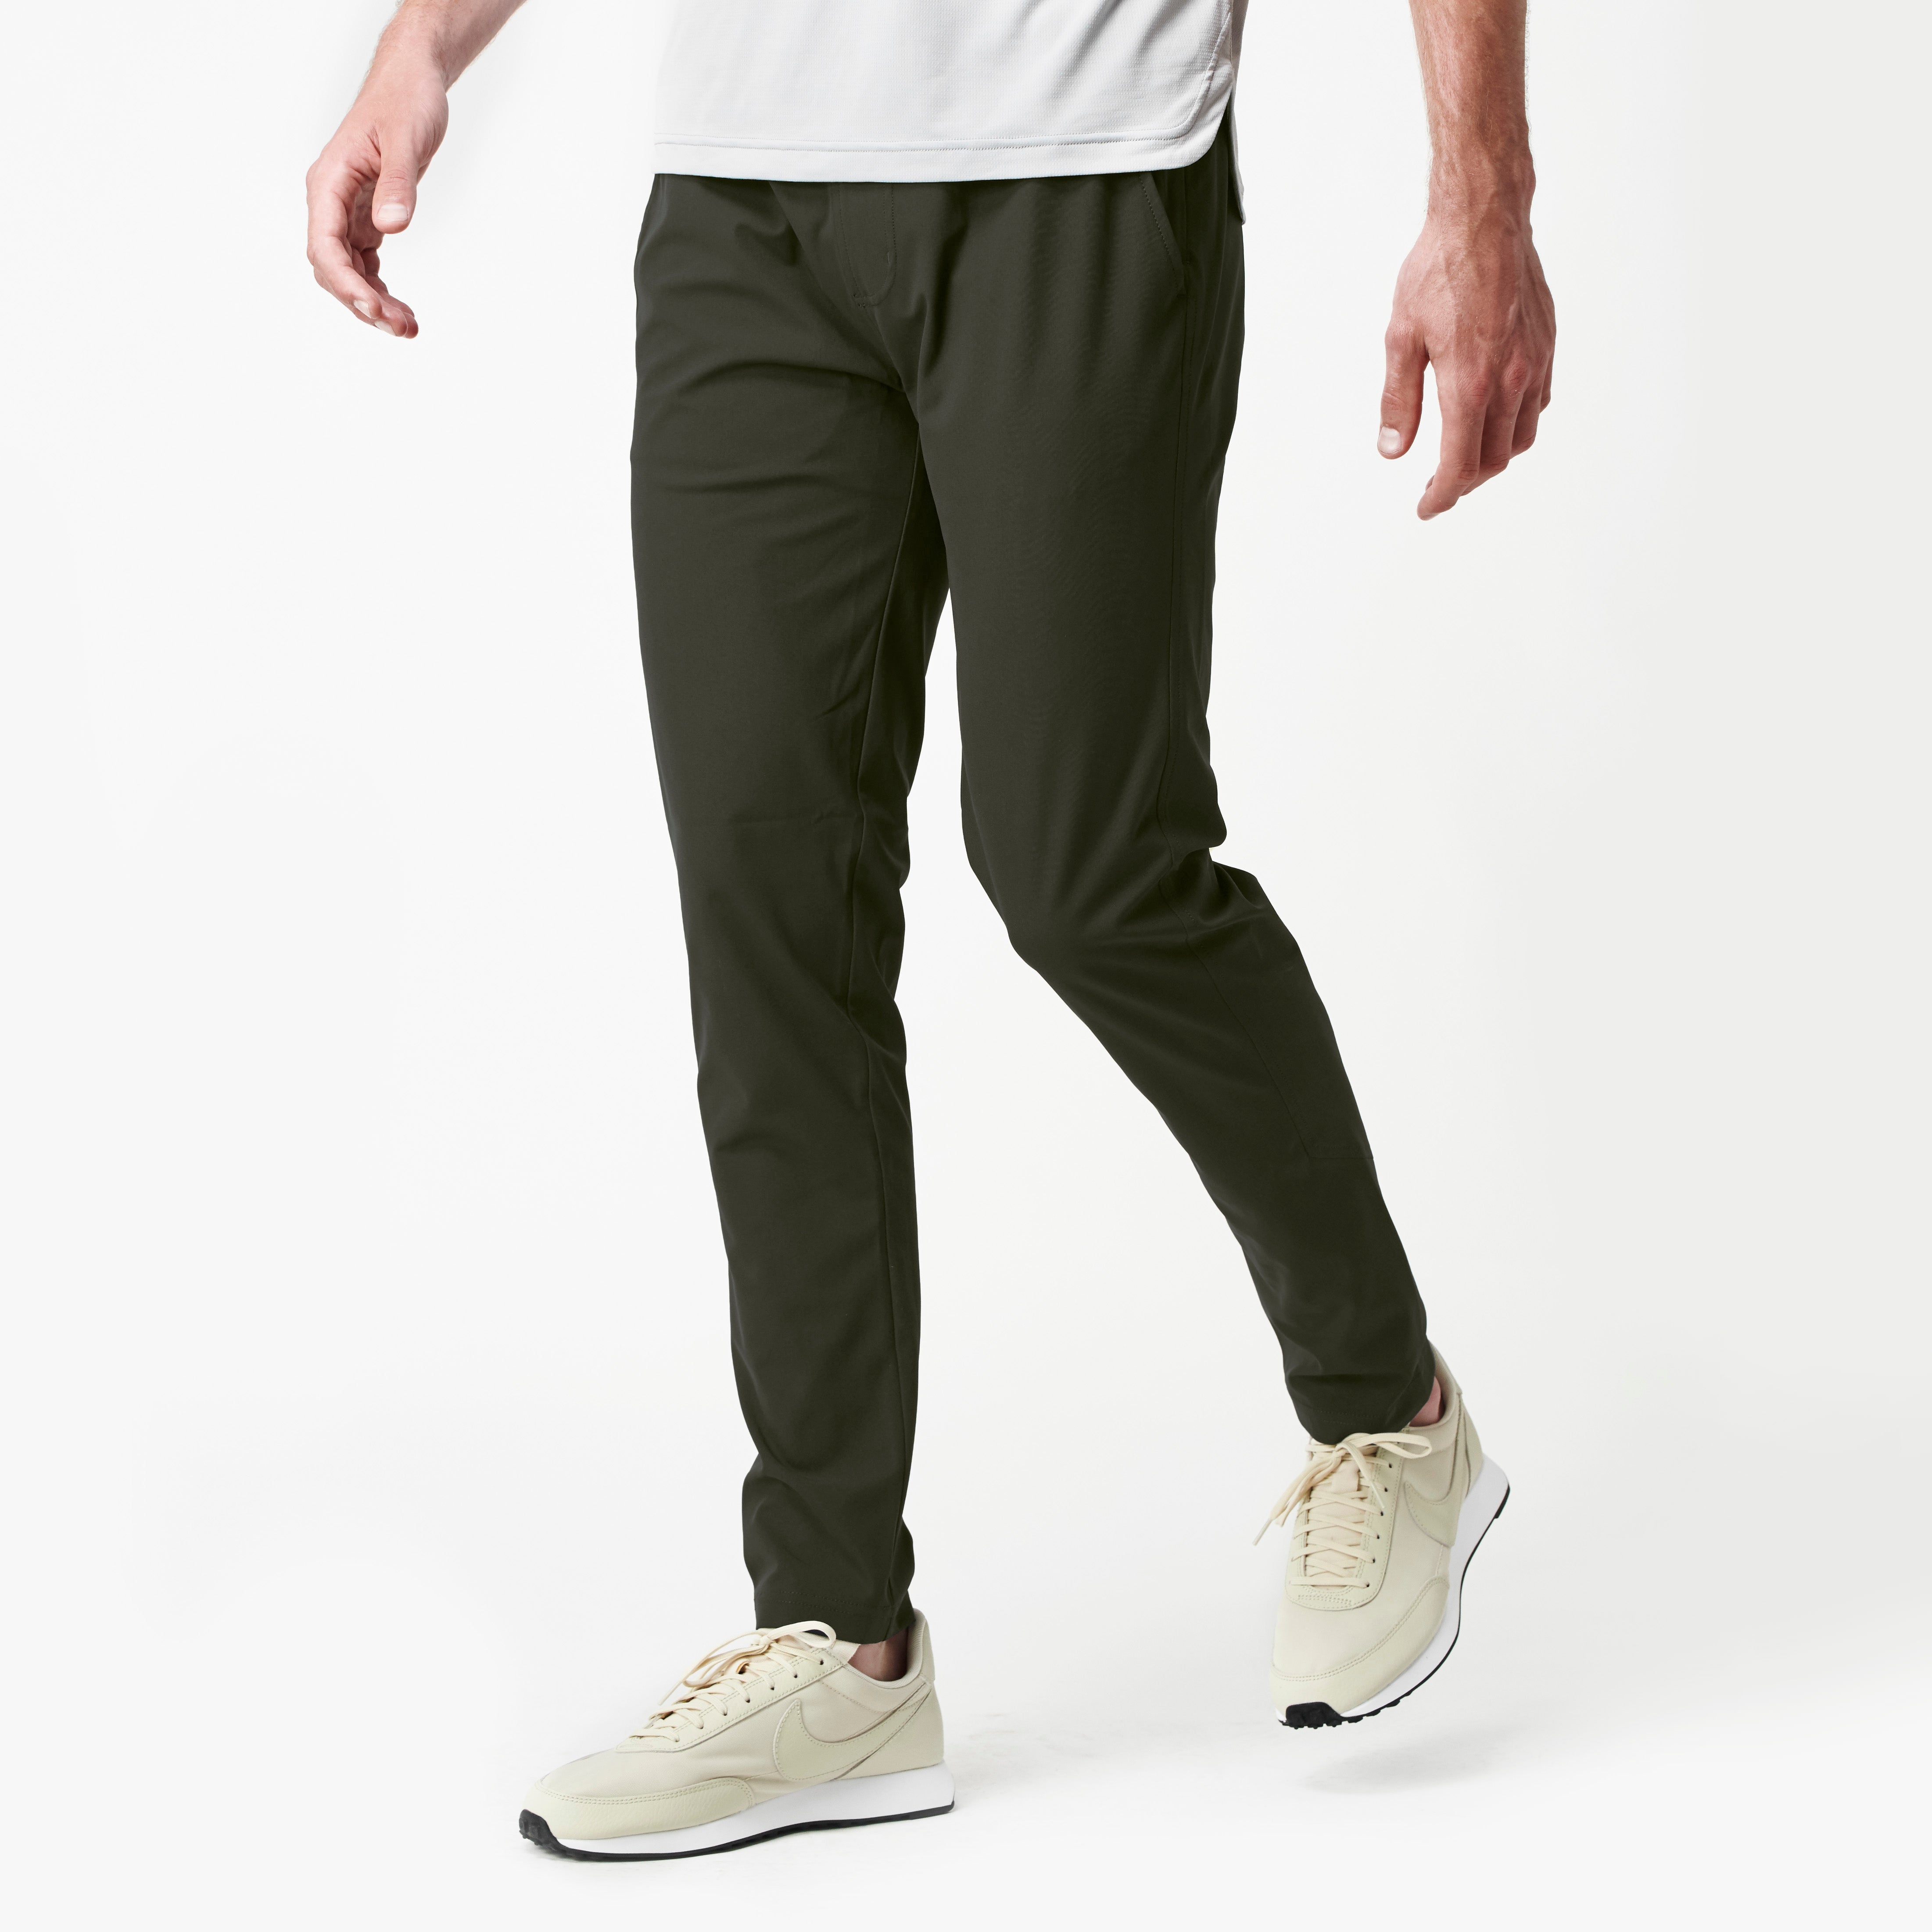 Jogger Pants adidas Originals Sustainability Classic Stretch Track Pant  Green